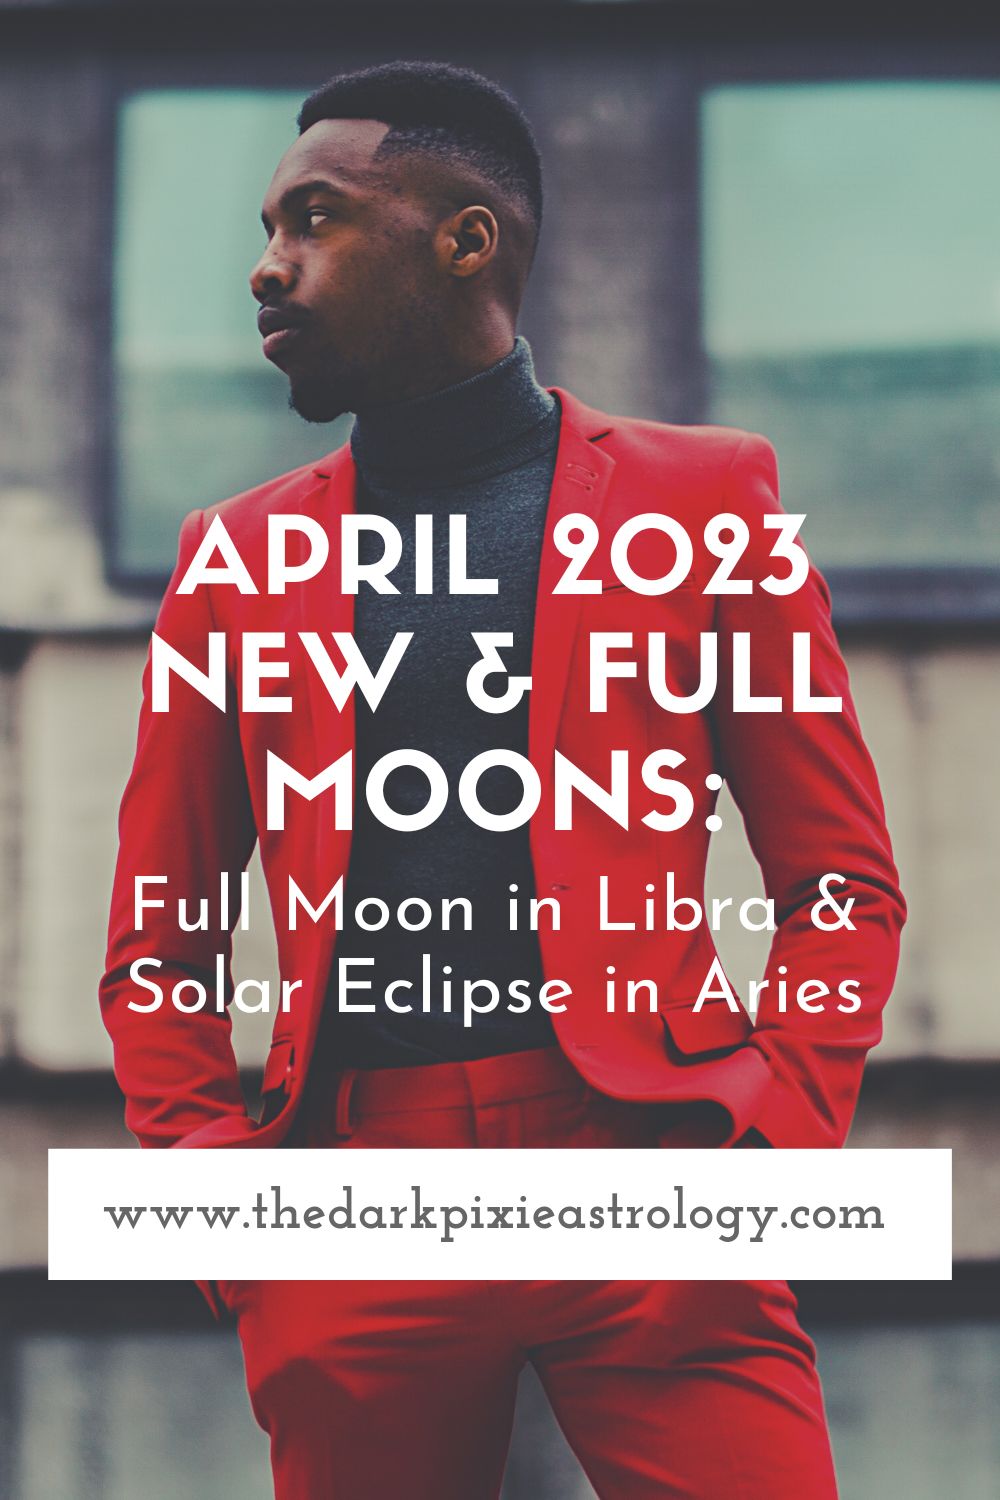 April 2023 New & Full Moons: Full Moon in Libra & Solar Eclipse in Aries - The Dark Pixie Astrology